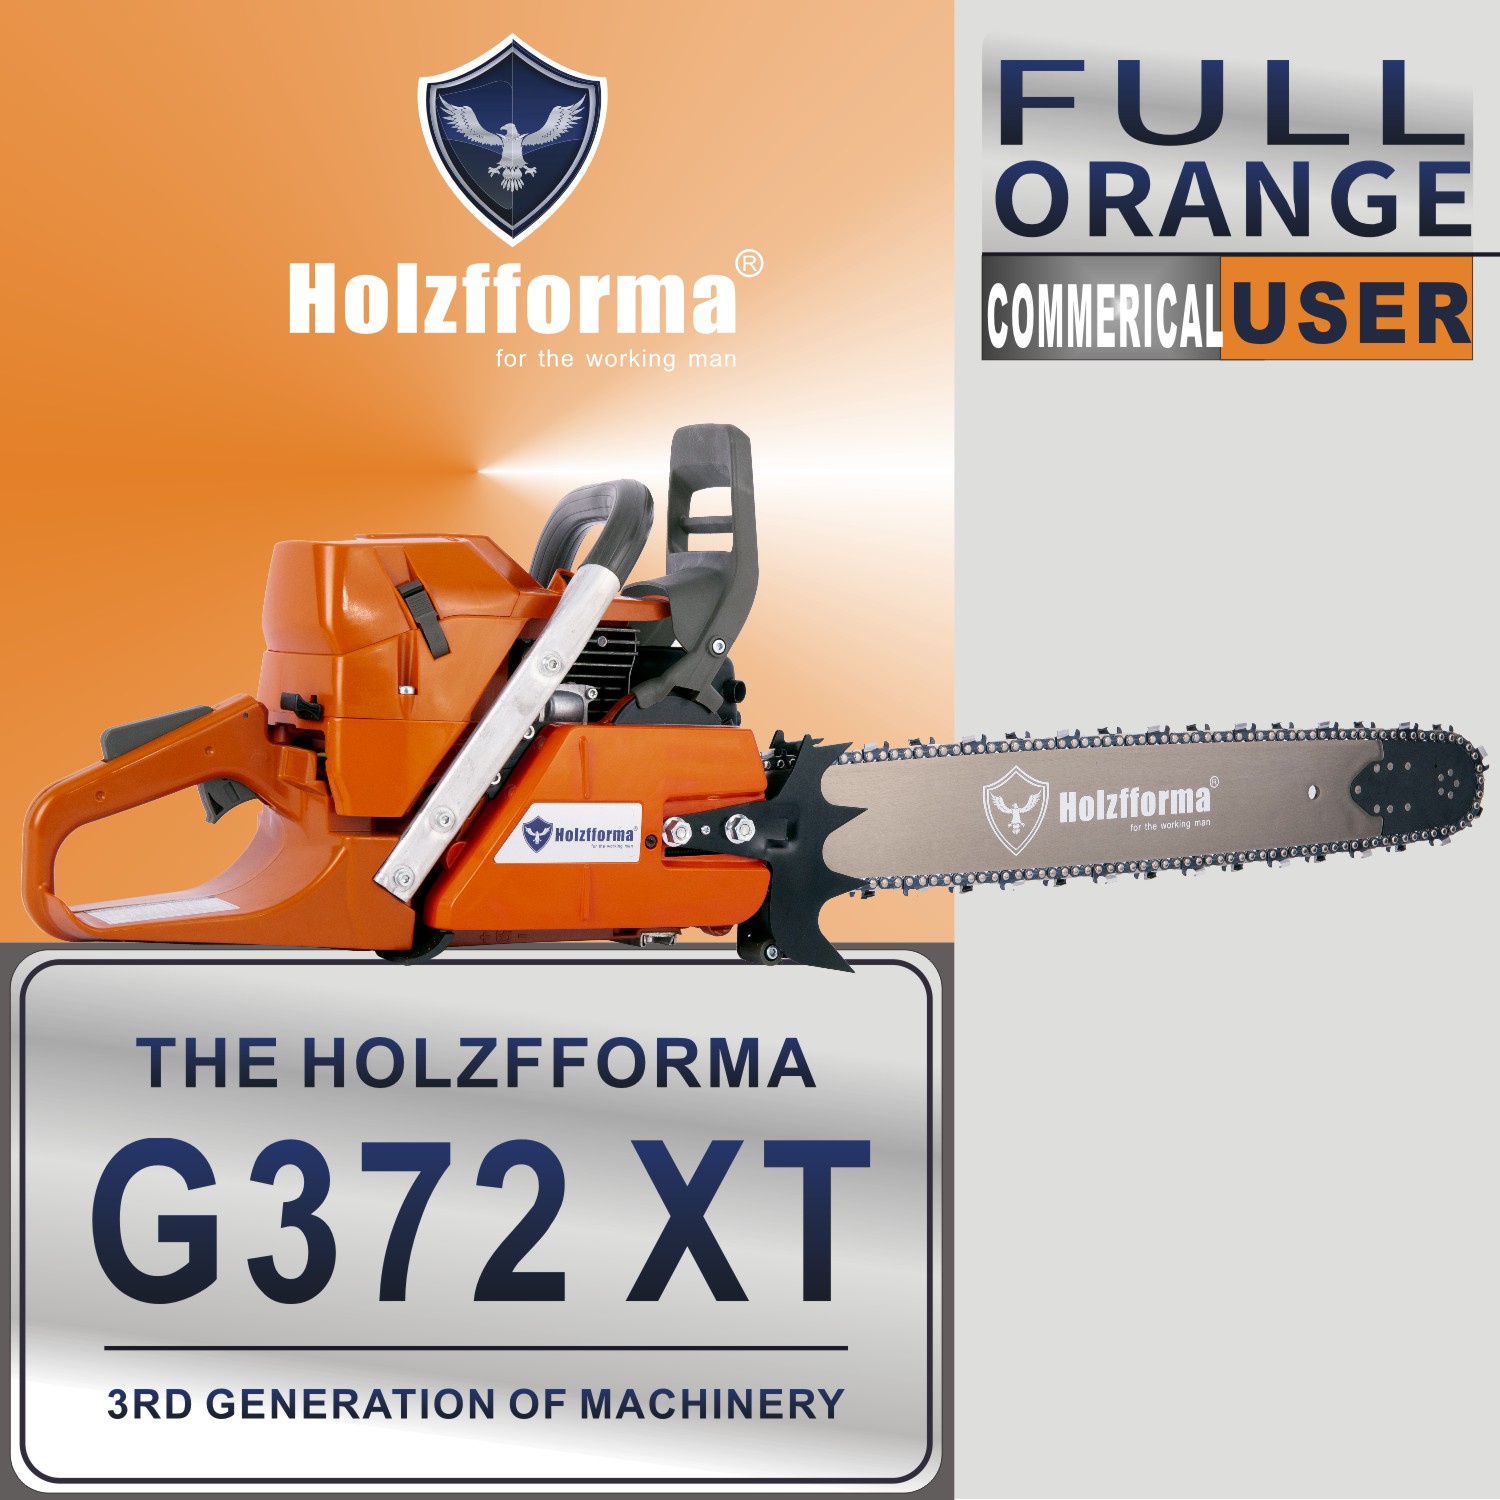 71cc Holzfforma® G372XT Gasoline Chain Saw Power Head Lower Fuel Consumption 50mm Bore Without Guide Bar and Chain Top Quality By Farmertec All Parts Are For H372X TORQ Chainsaw